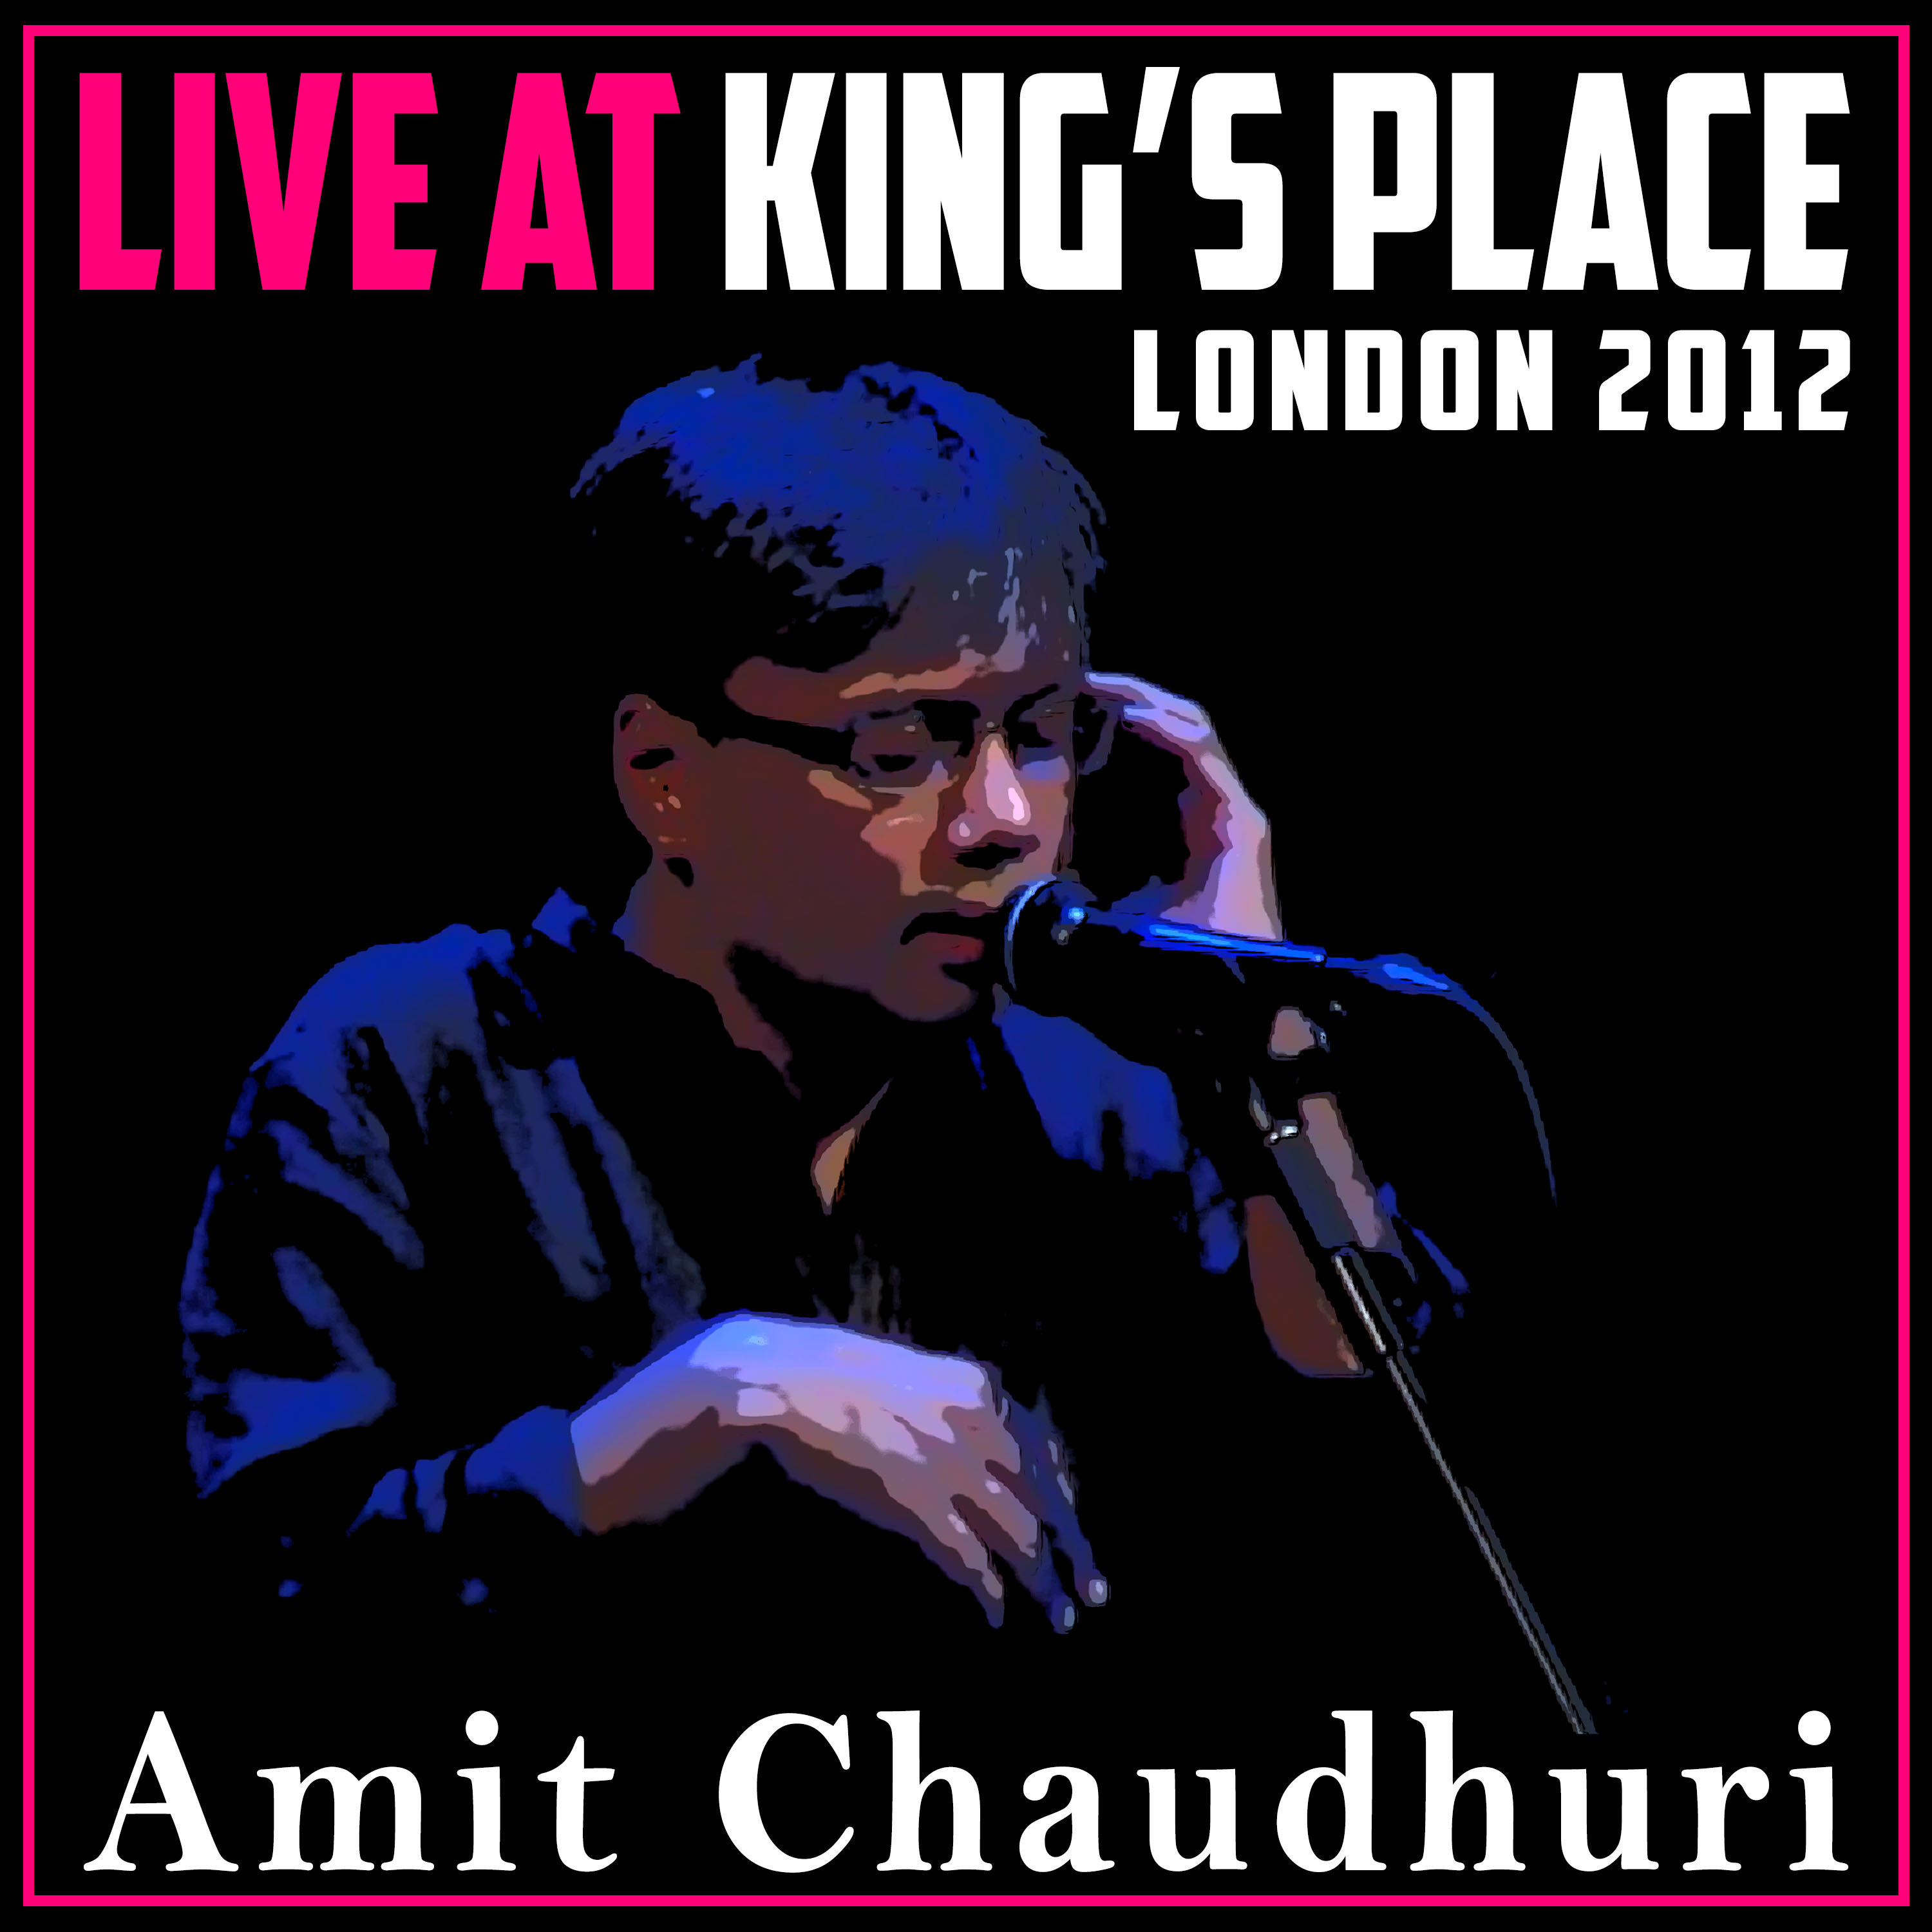 Amit Chaudhuri releases brand new album, ‘Live at King’s Place, London 2012’